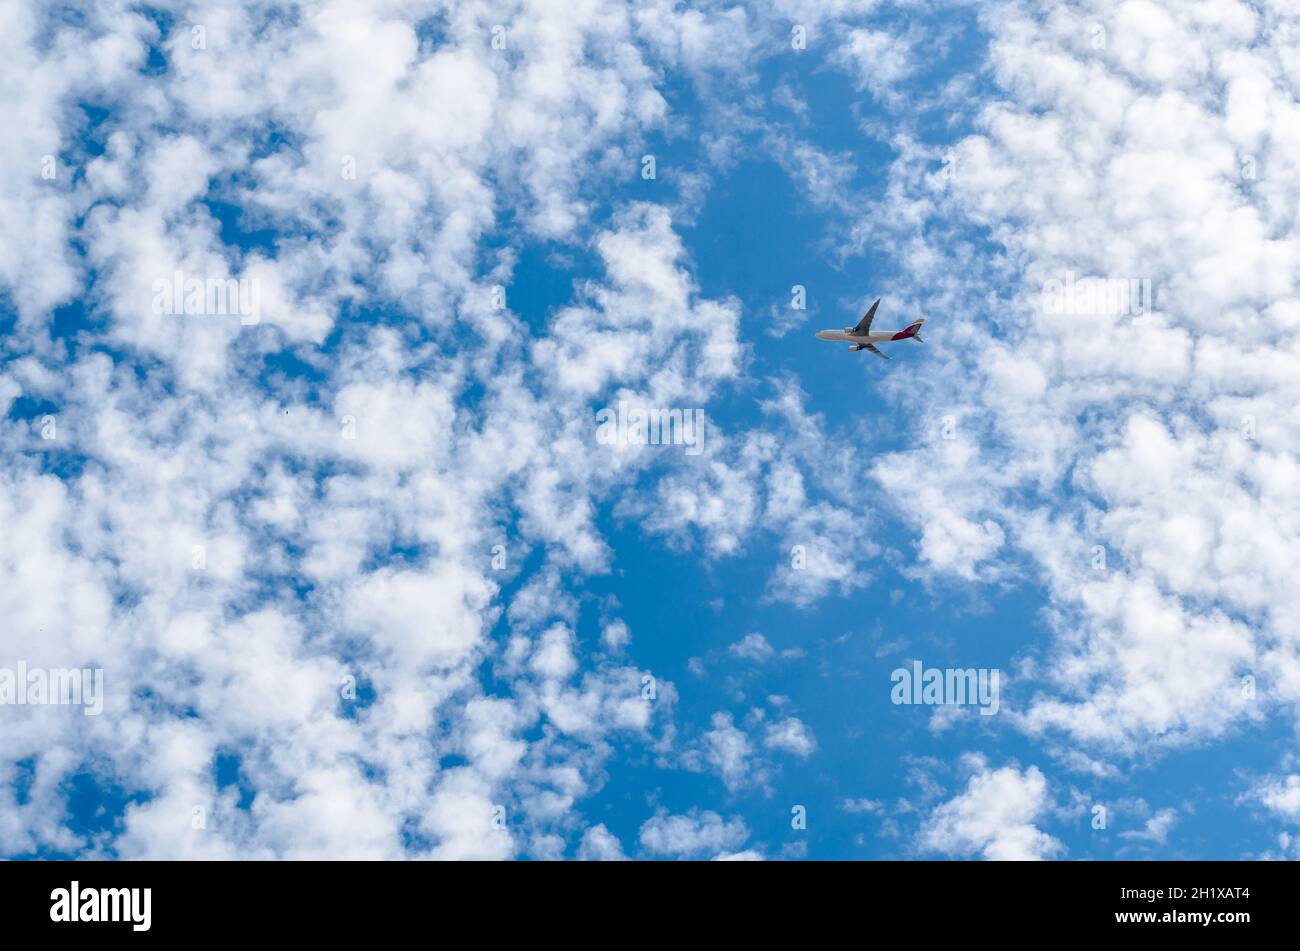 MADRID, SPAIN - JULY 25, 2021: An airplane of the Spanish airline Iberia on a blue sky with white clouds background, after departing from Madrid airpo Stock Photo